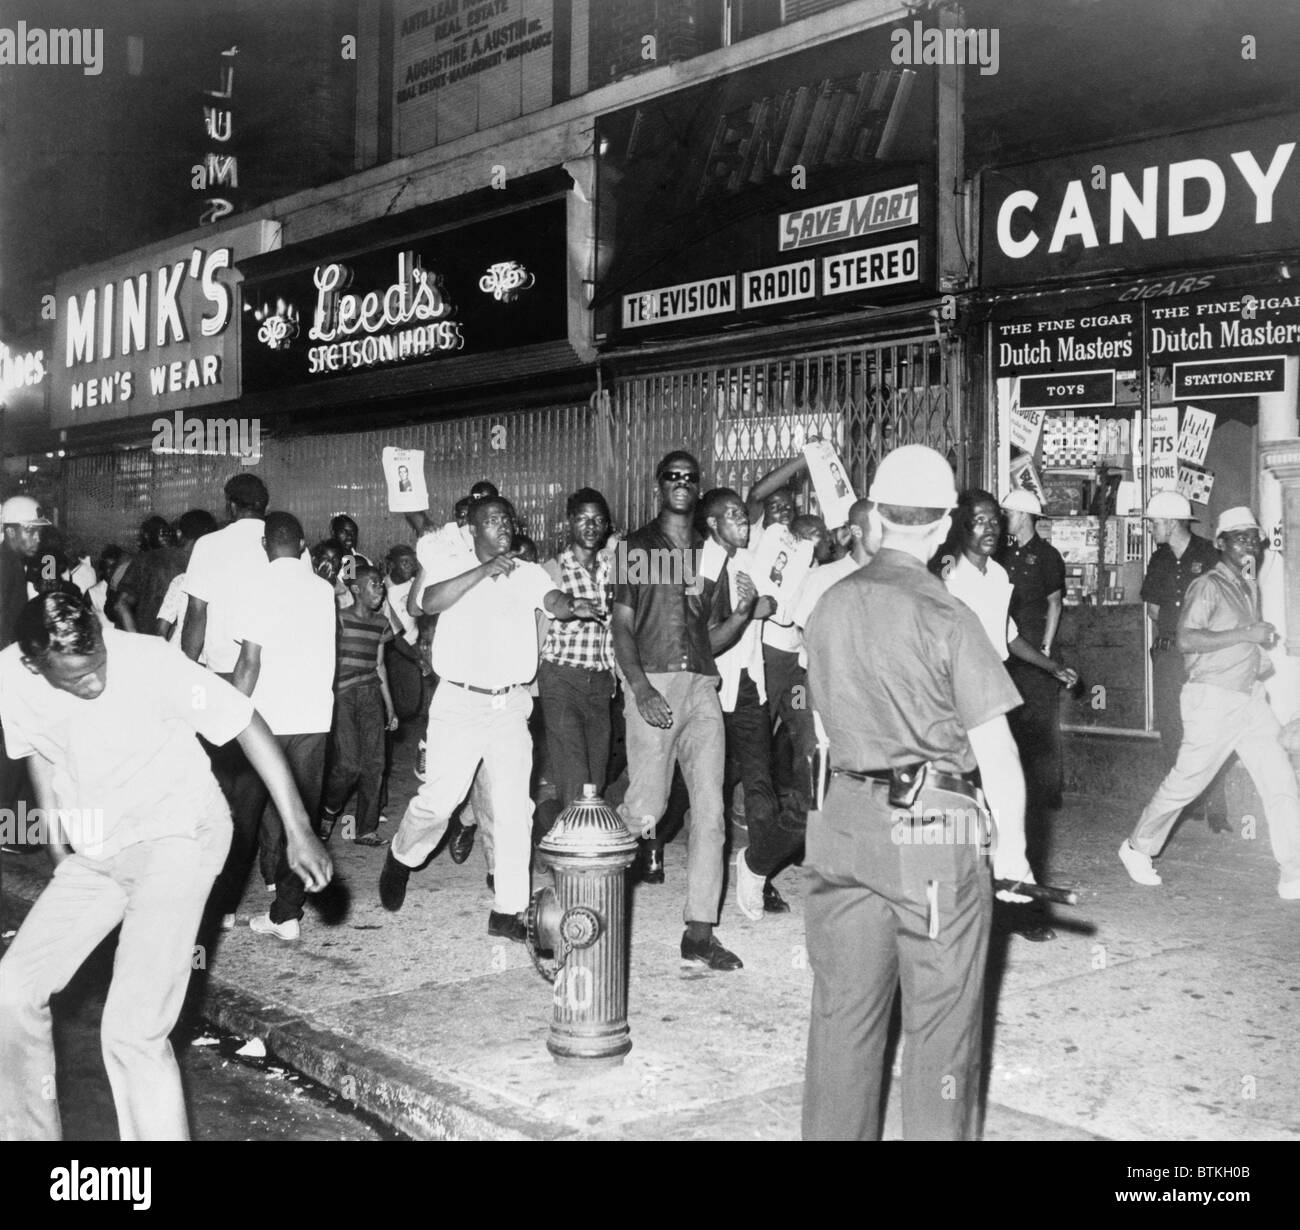 Youthful crowd chanting along the sidewalk on 125th St. during the first inner-city riots of the 1960s in Harlem, New York City. July 15-16, 1964. Stock Photo